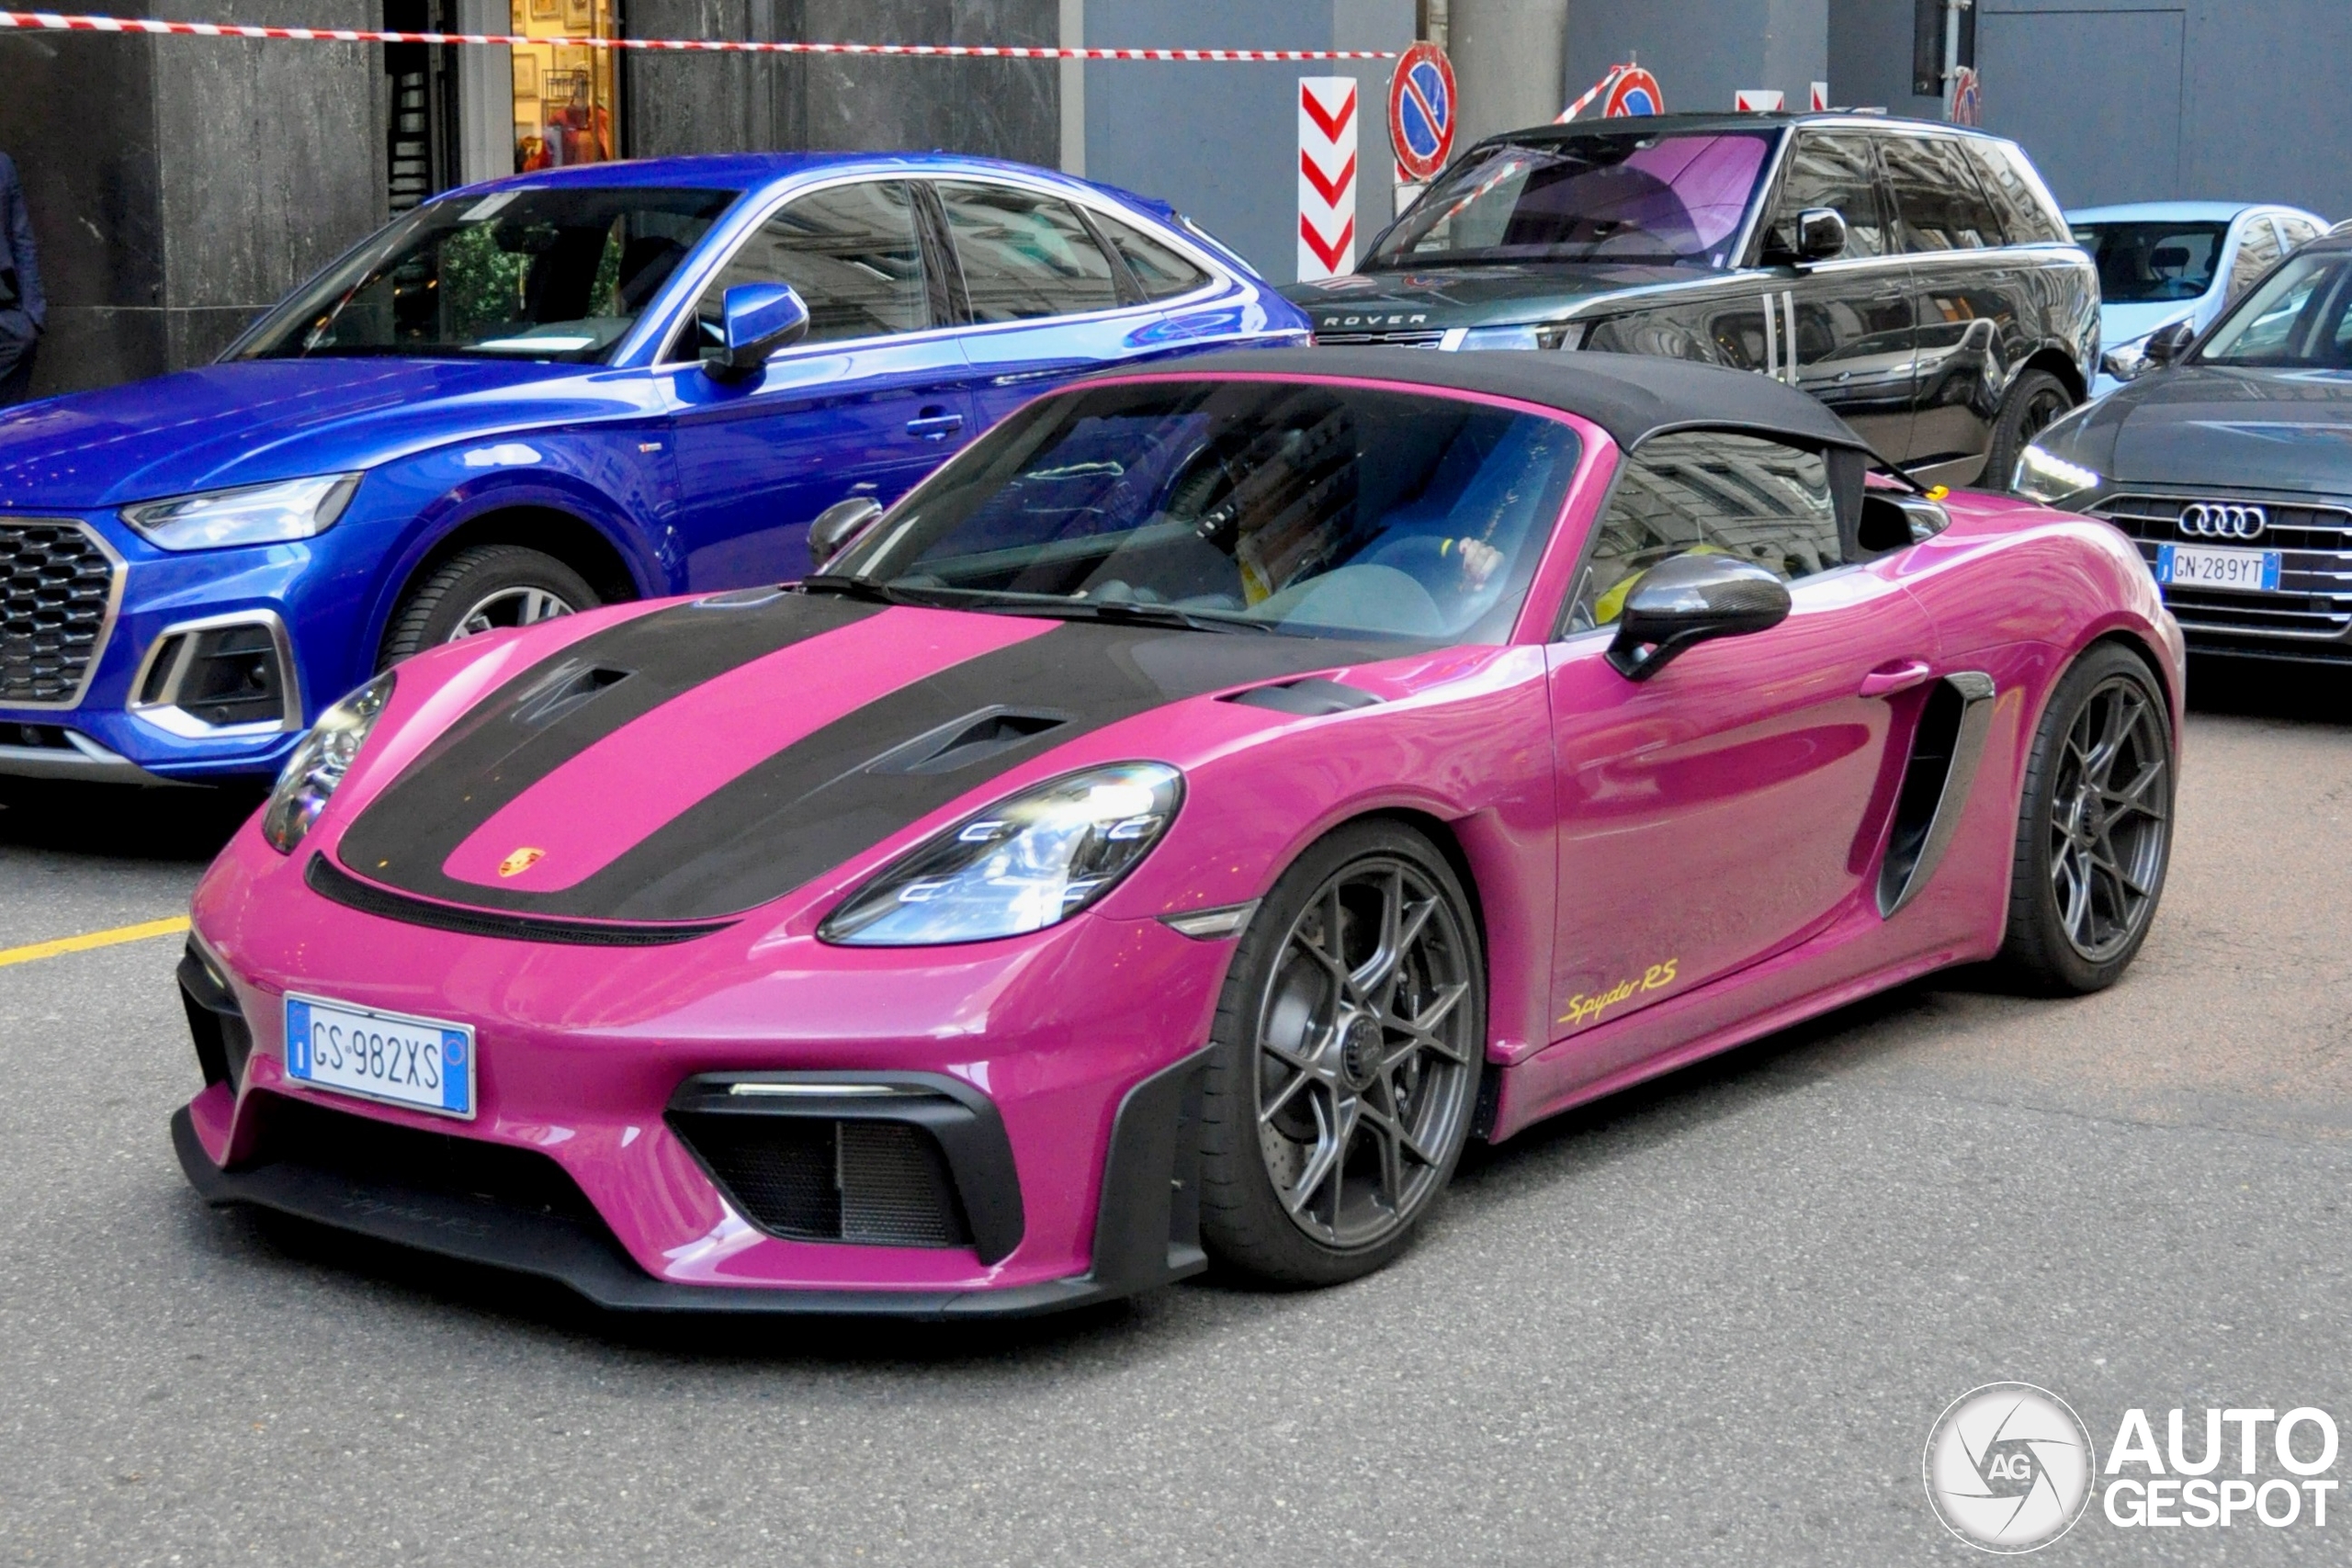 One of the most controversial colors from Porsche